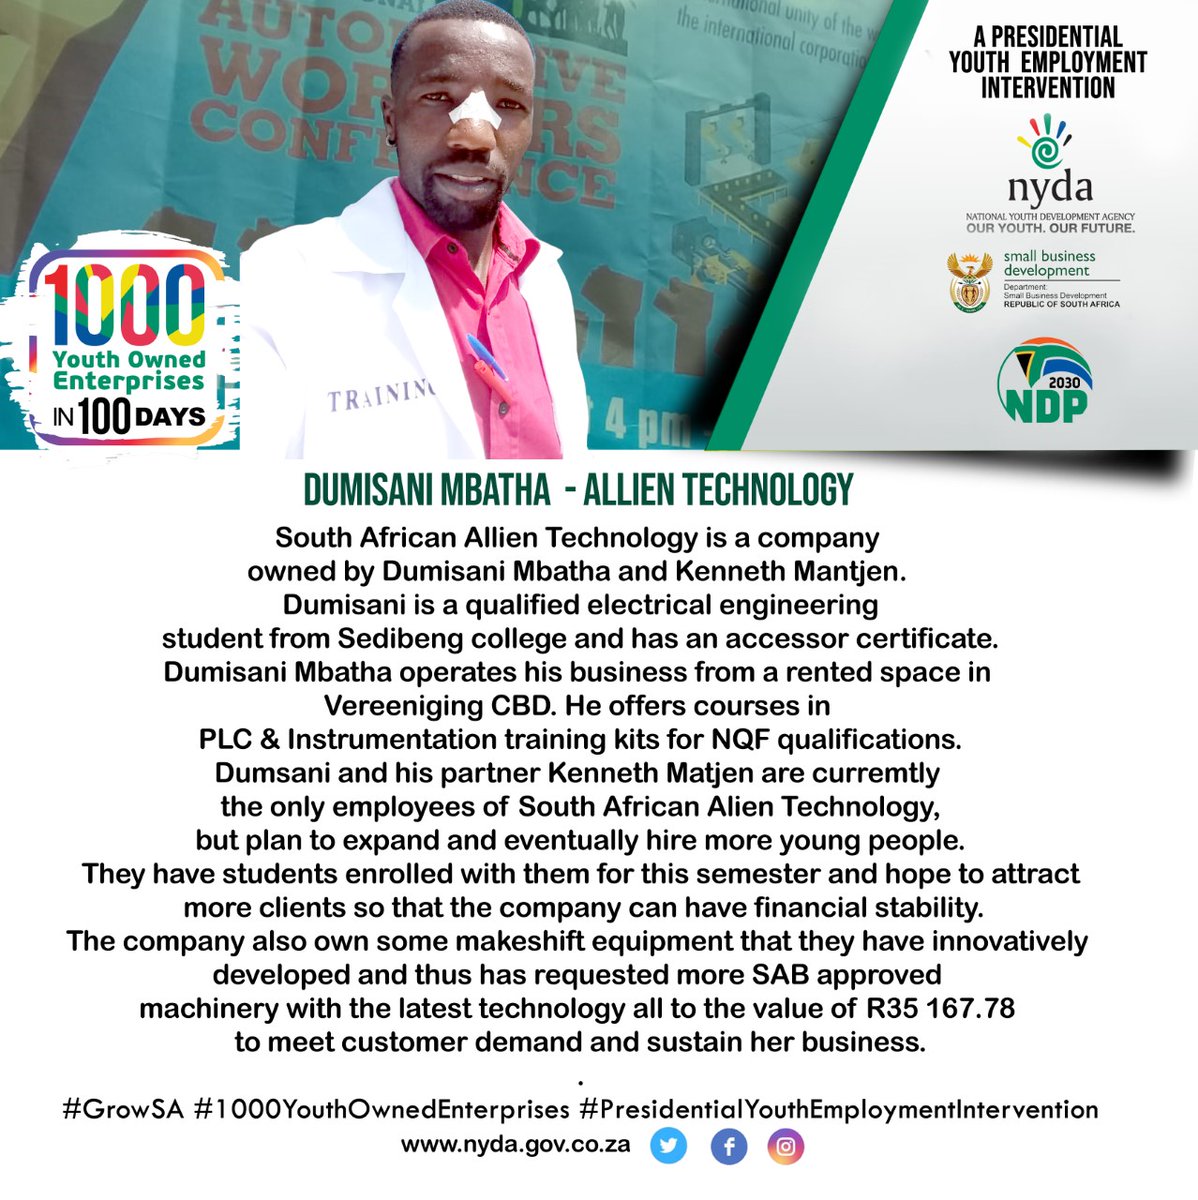 Meet one of our 1000 youth enterprises in 100 days beneficiaries, Mr Dumisani Mbatha.

#GrowSA #1000youthownedenterprises #PresidentialYouthEmploymentIntervention